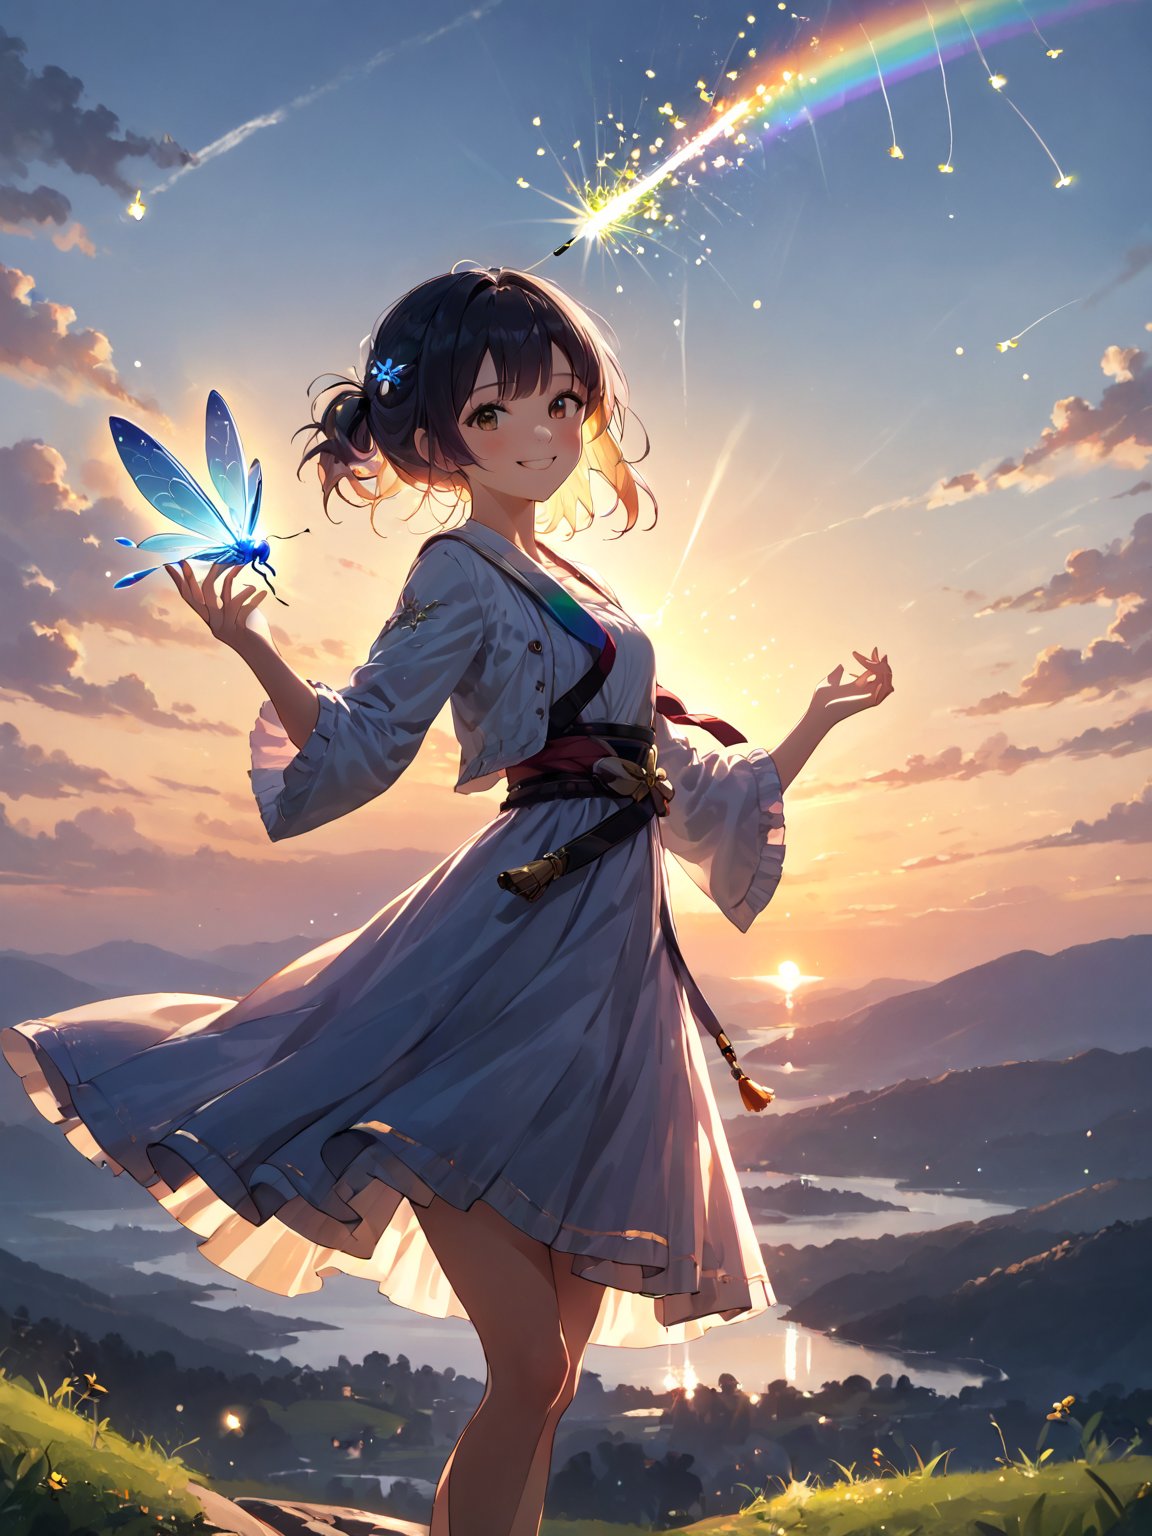 score_9,score_8_up,score_7_up,score_6_up, masterpiece, best quality, highres
,//Character, 
1girl, solo,SakayanagiArisu
,//Fashion, 

,//Background, 
,//Others, ,Expressiveh,
The girl standing triumphantly atop a hill, silhouetted against a beautiful sunset. She's holding a magical artifact that glows with rainbow colors. Her posture is confident, and a smile of accomplishment lights up her face. Fireflies dance around her, adding a magical touch to the scene.